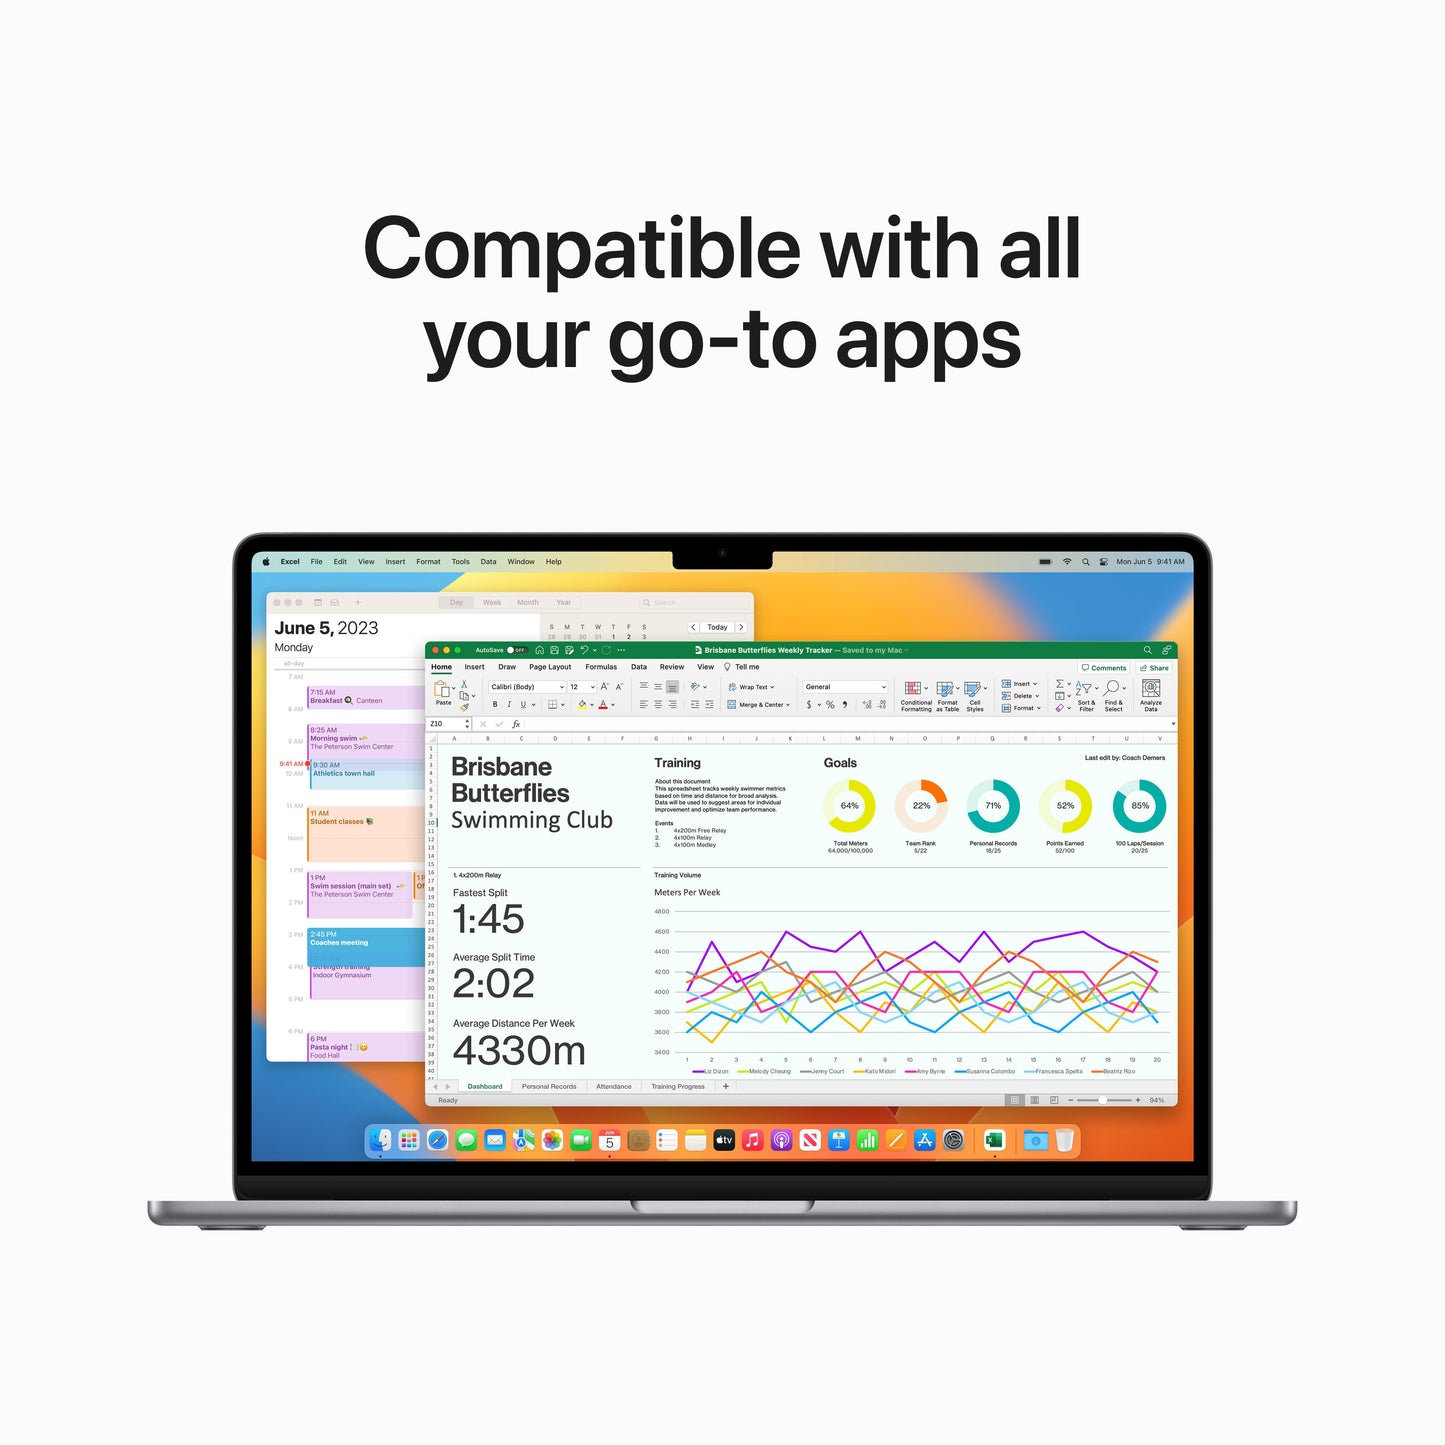 15-inch MacBook Air: Apple M2 chip with 8‑core CPU and 10‑core GPU, 256GB SSD - Space Gray